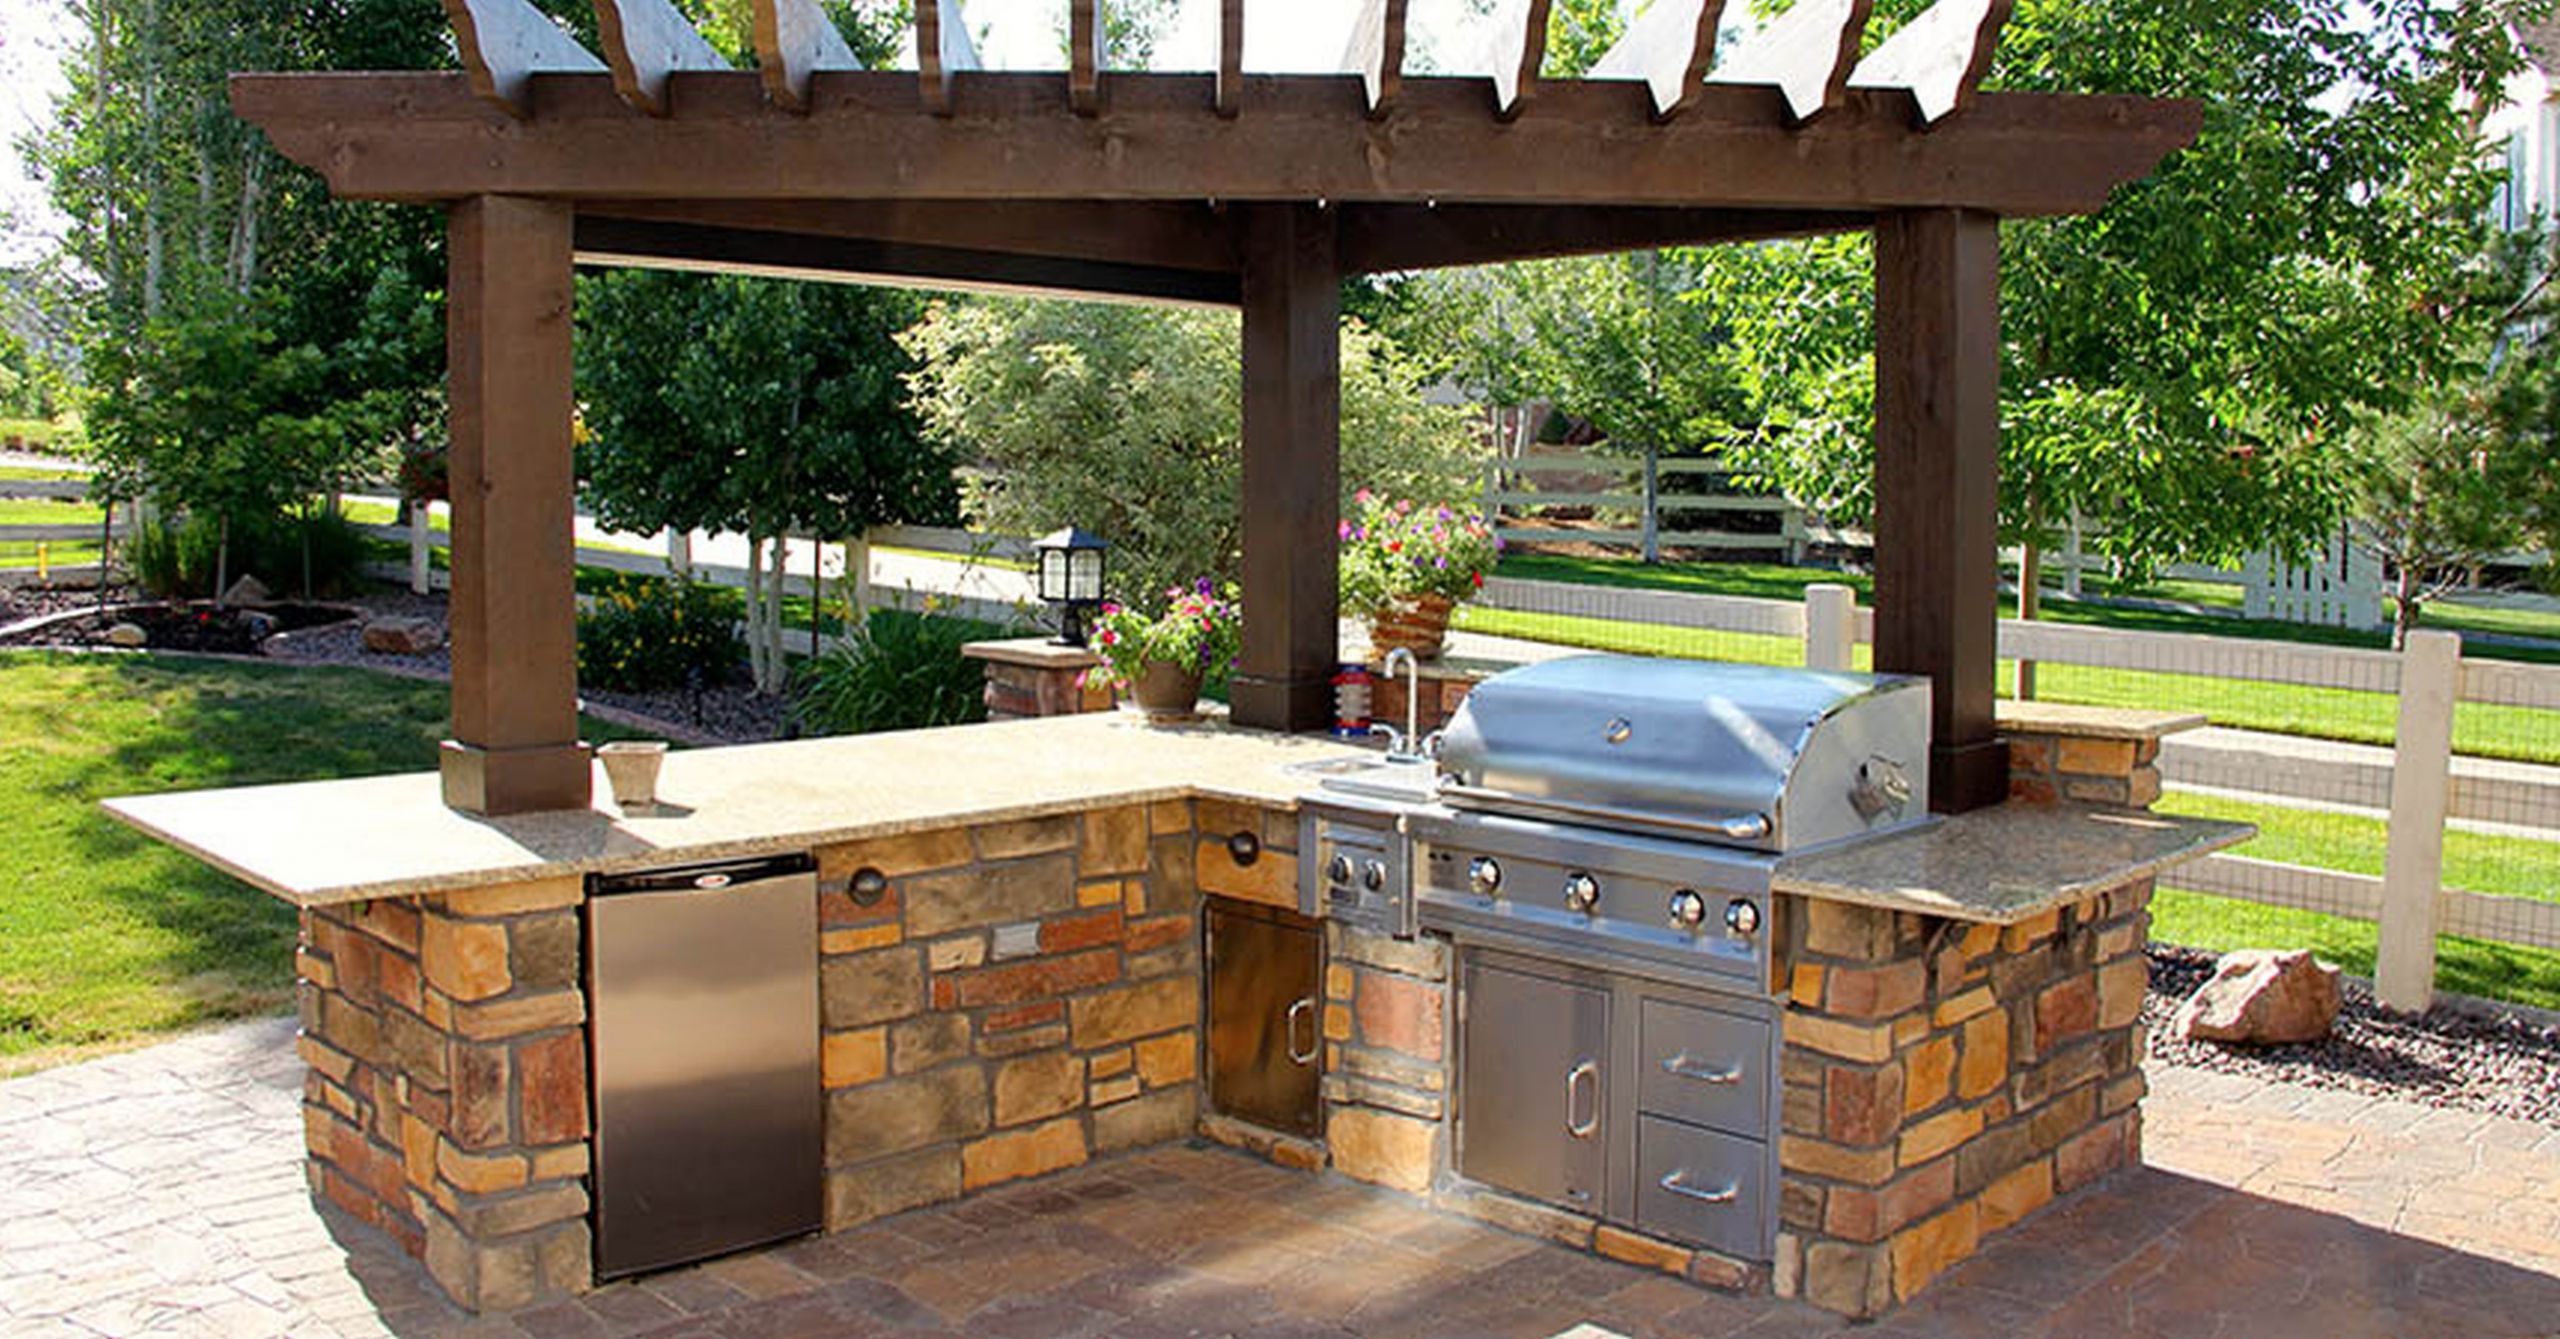 Simple Outdoor Kitchen
 Outdoor Kitchen Plans Ideas and Tips for Getting the